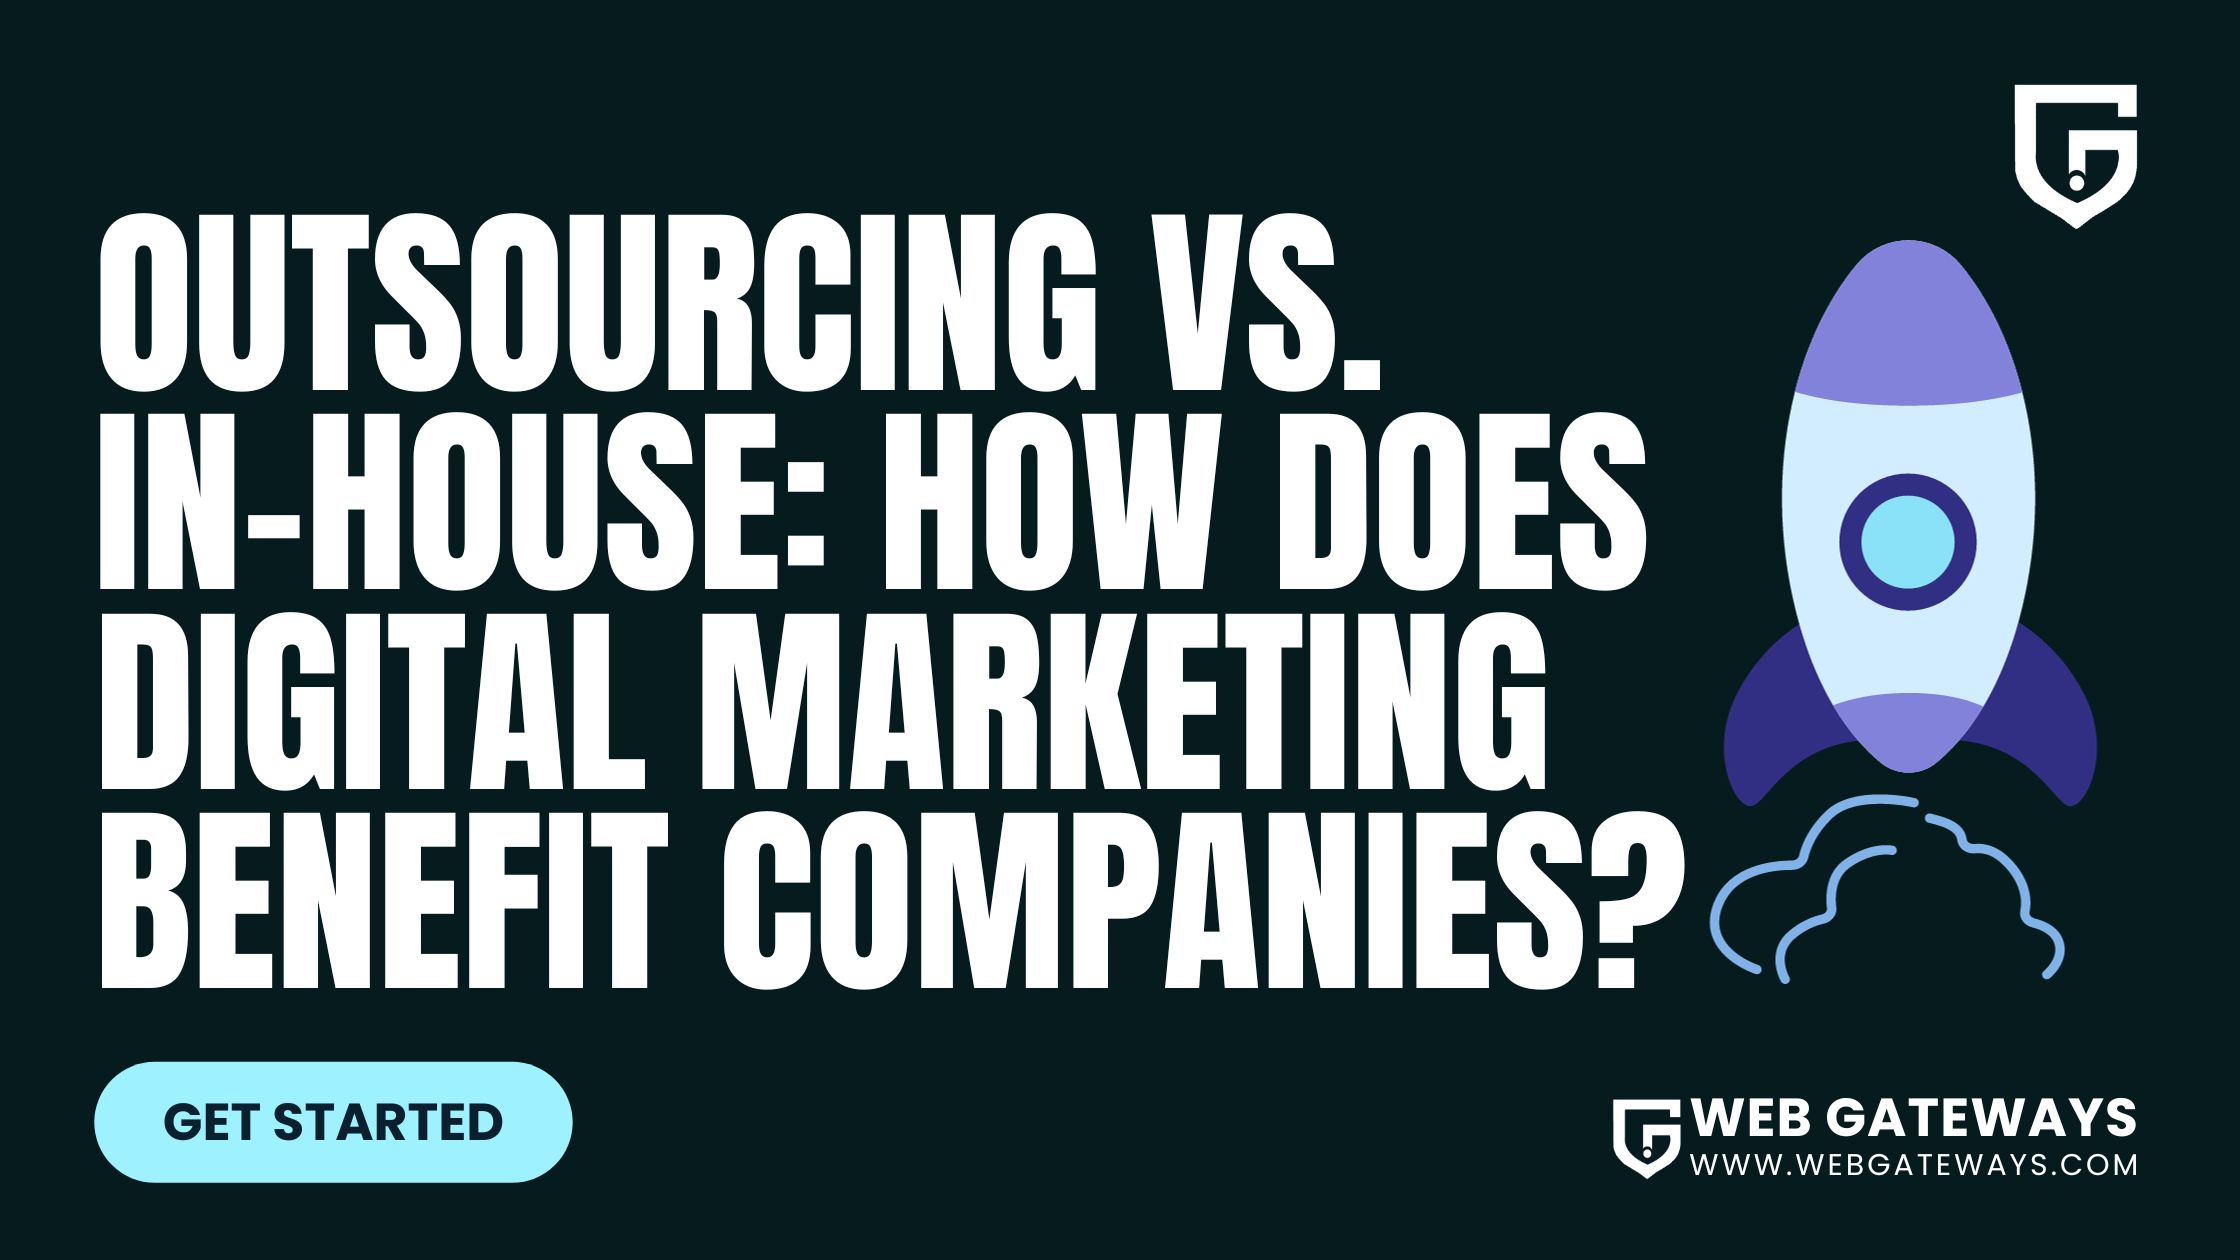 Outsourcing vs. In-House: How Does Digital Marketing Benefit Companies?